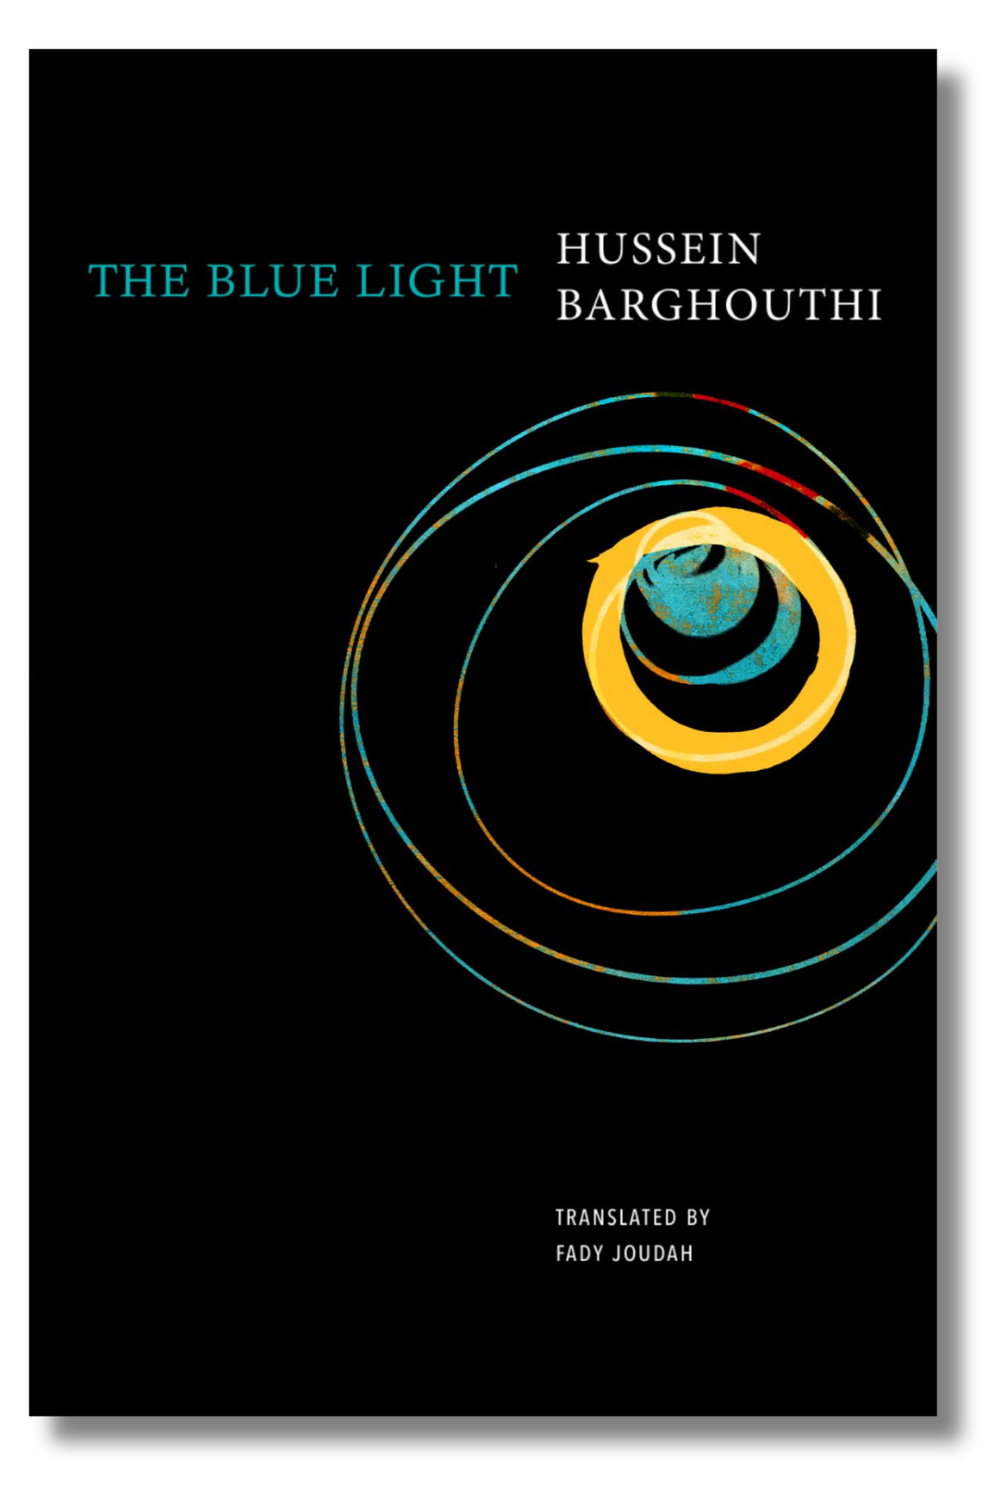 The cover of Hussein Bargouthi's "The Blue Light," translated by Fady Joudah